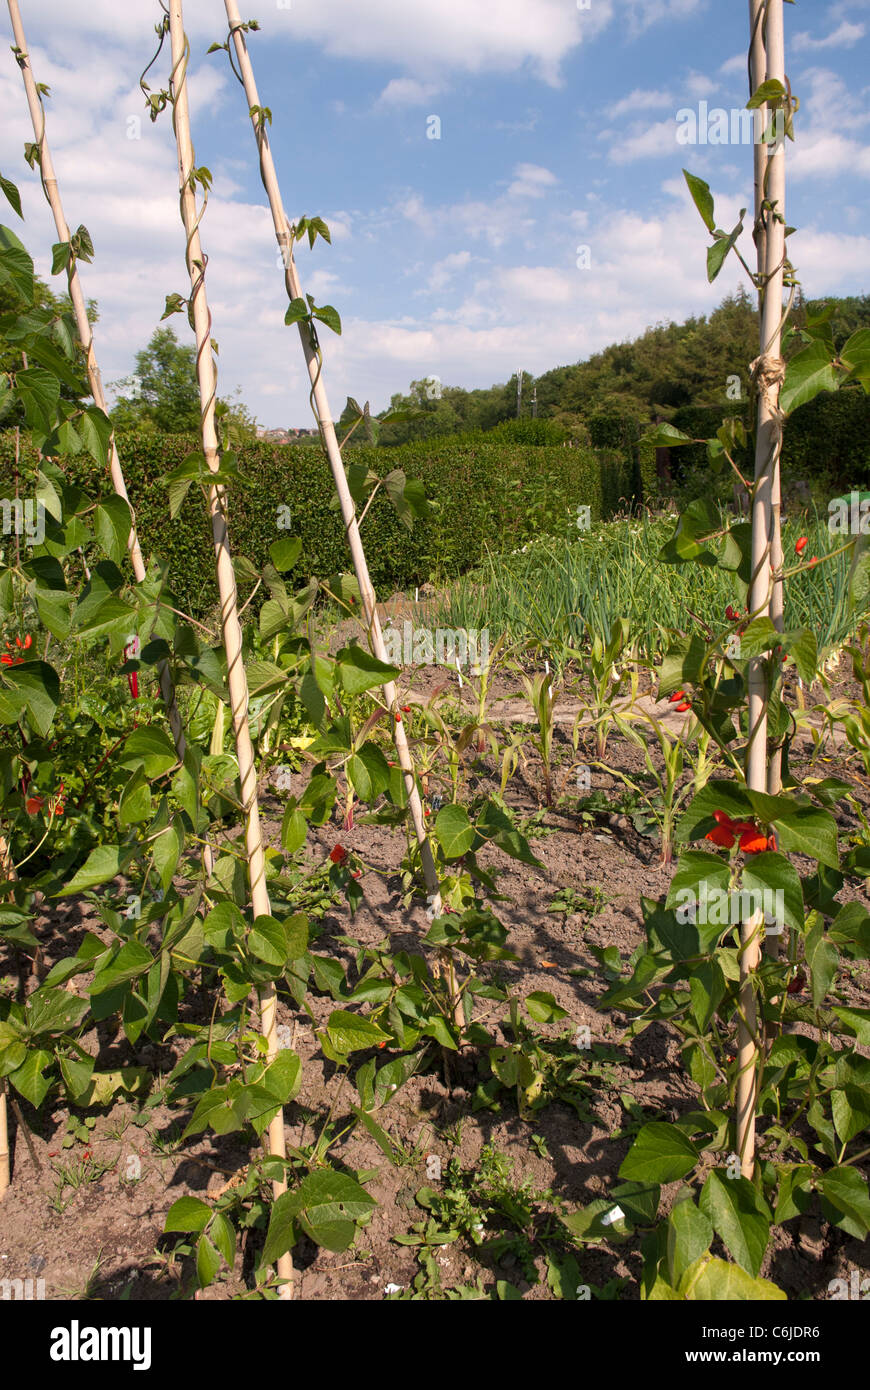 View of an allotment and runner beans 'Armstrong', South Yorkshire, England. Stock Photo